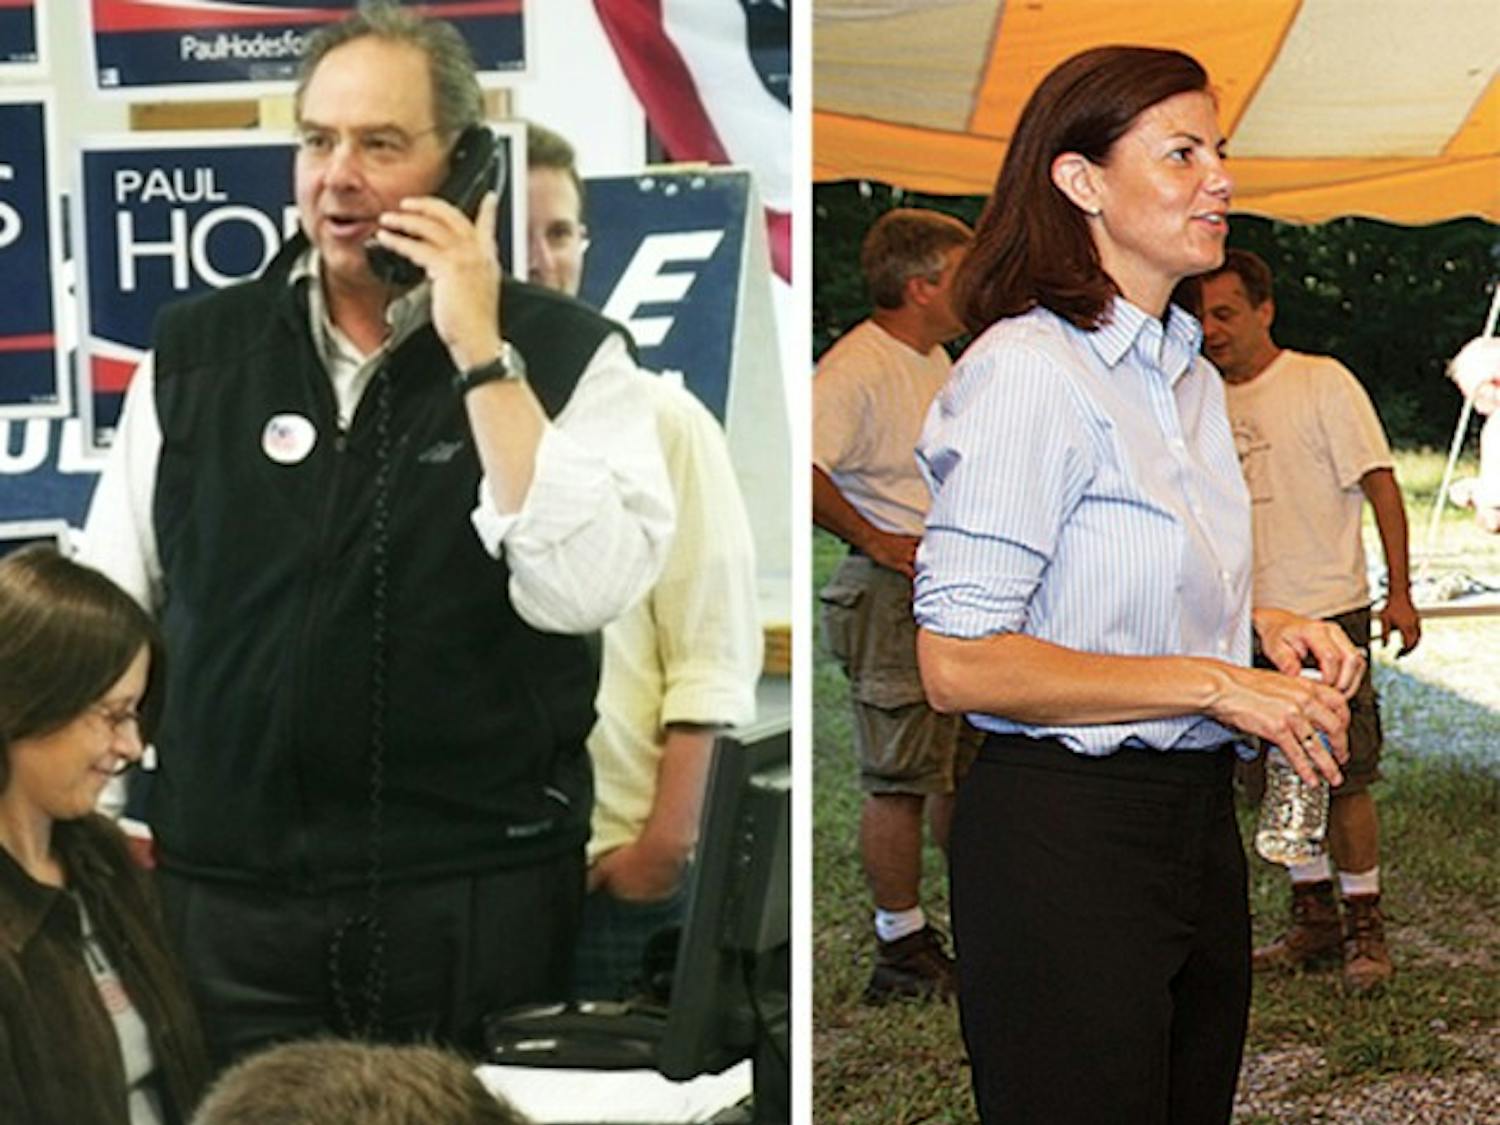 The two nominees for U.S. Senate in New Hampshire, Democratic Rep. Paul Hodes and Republican Kelly Ayotte, are set to square off in November.